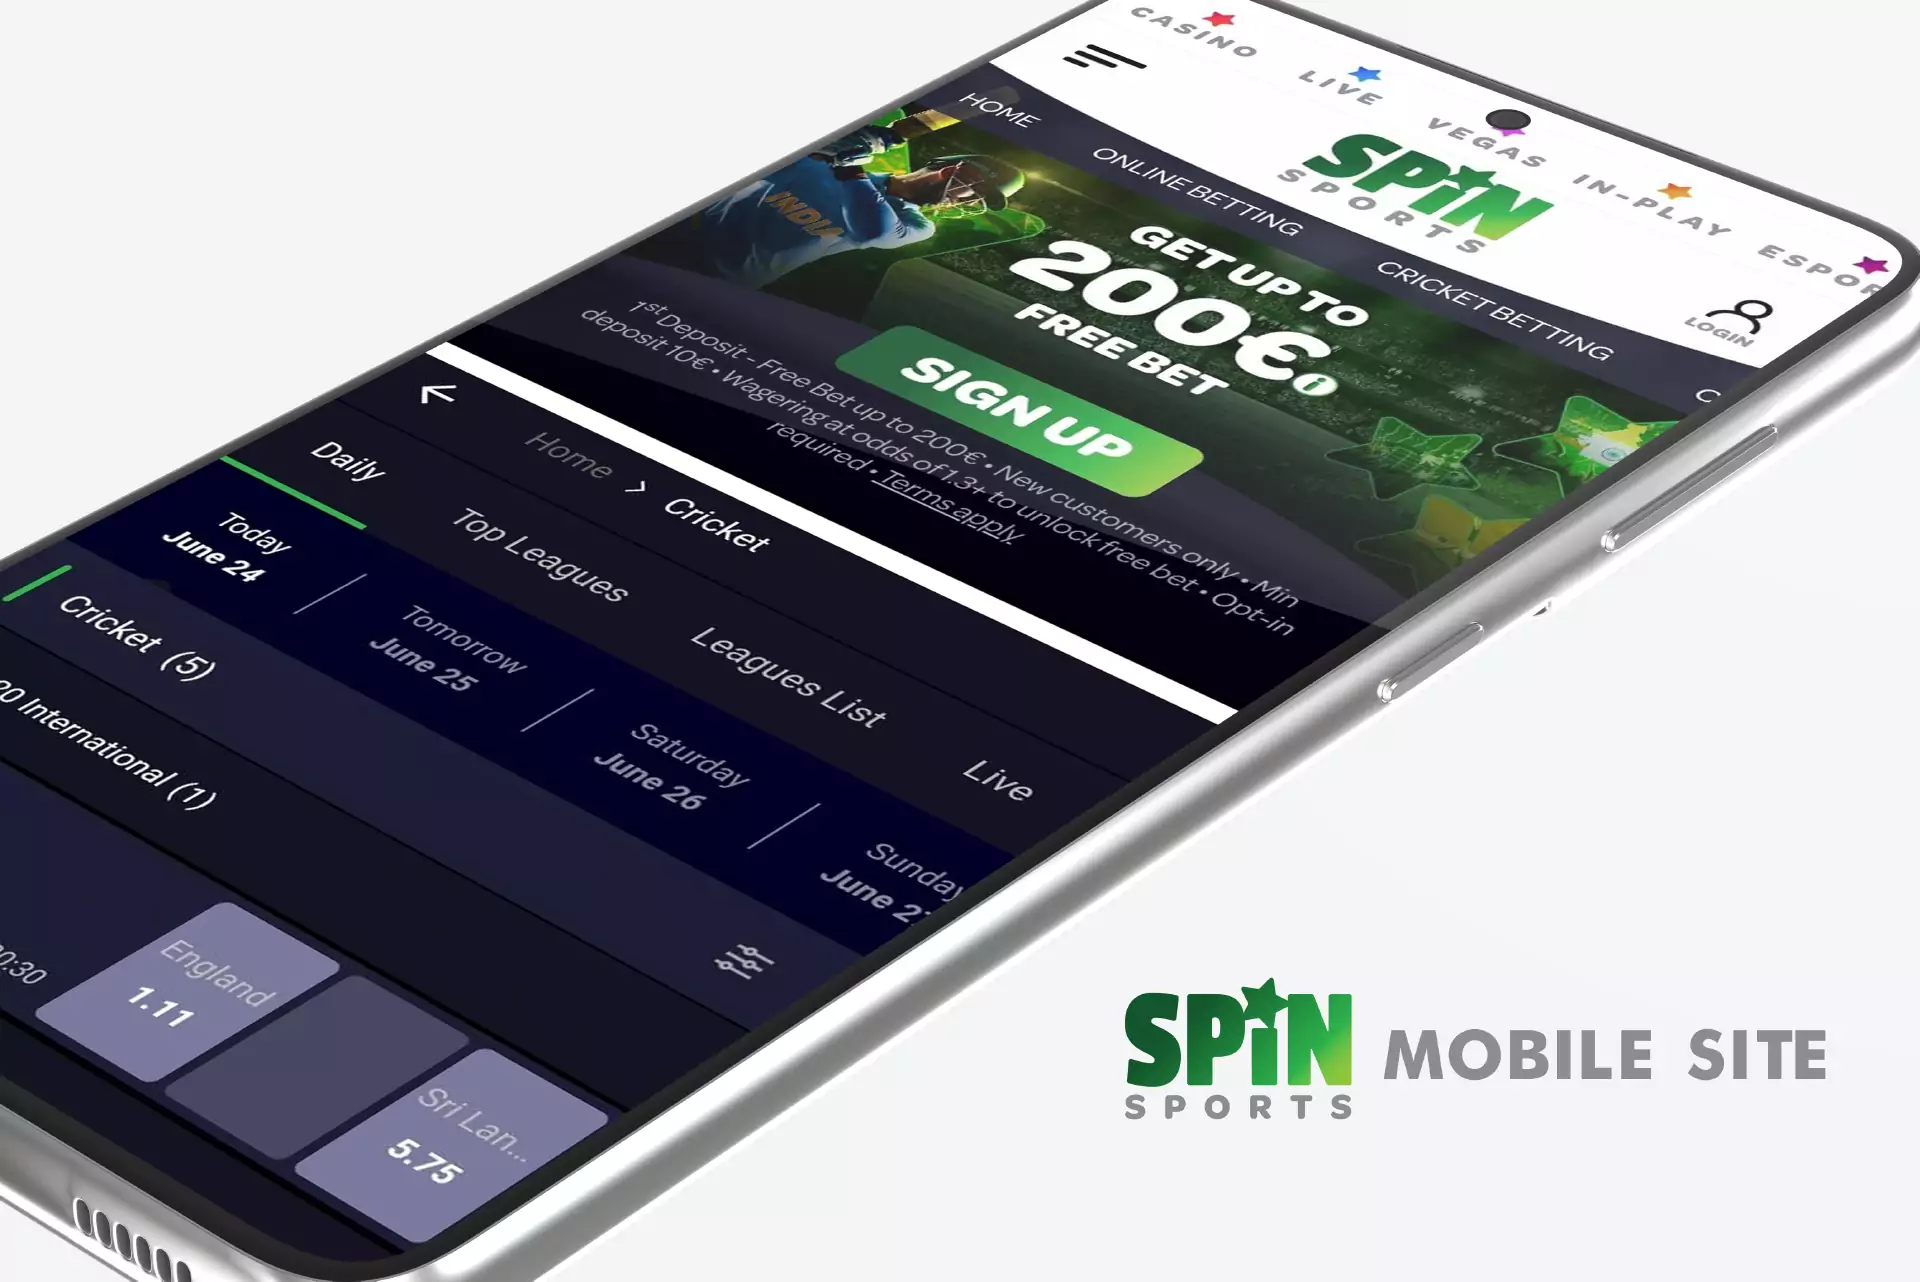 If you have a smartphone, you can place bets on the mobile site of Spins Sports.